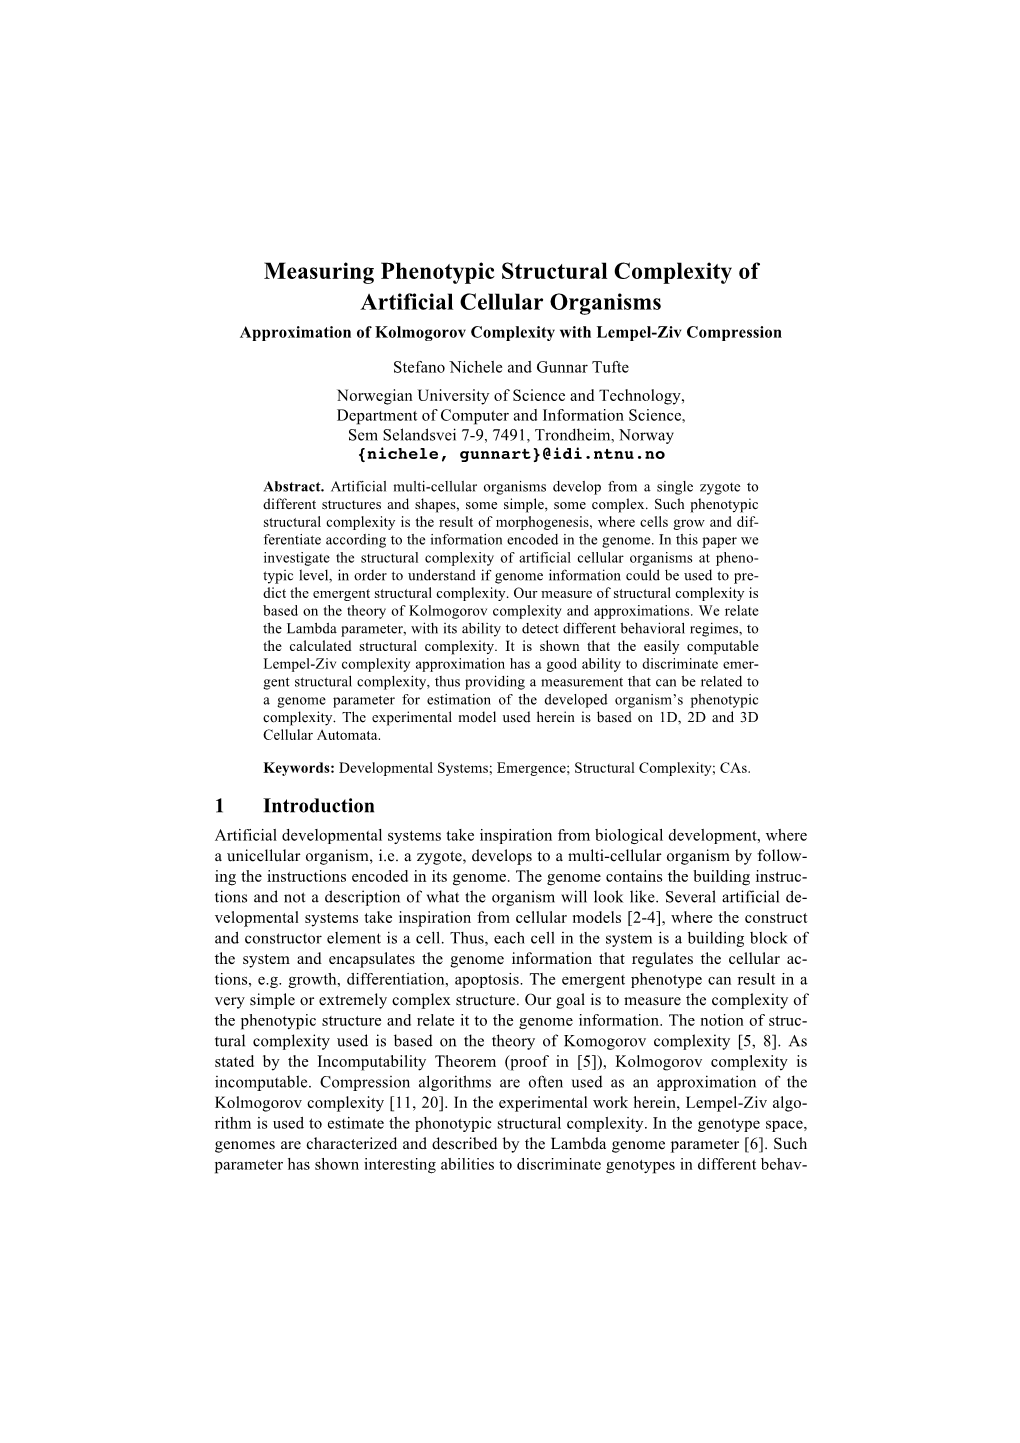 Measuring Phenotypic Structural Complexity of Artificial Cellular Organisms Approximation of Kolmogorov Complexity with Lempel-Ziv Compression